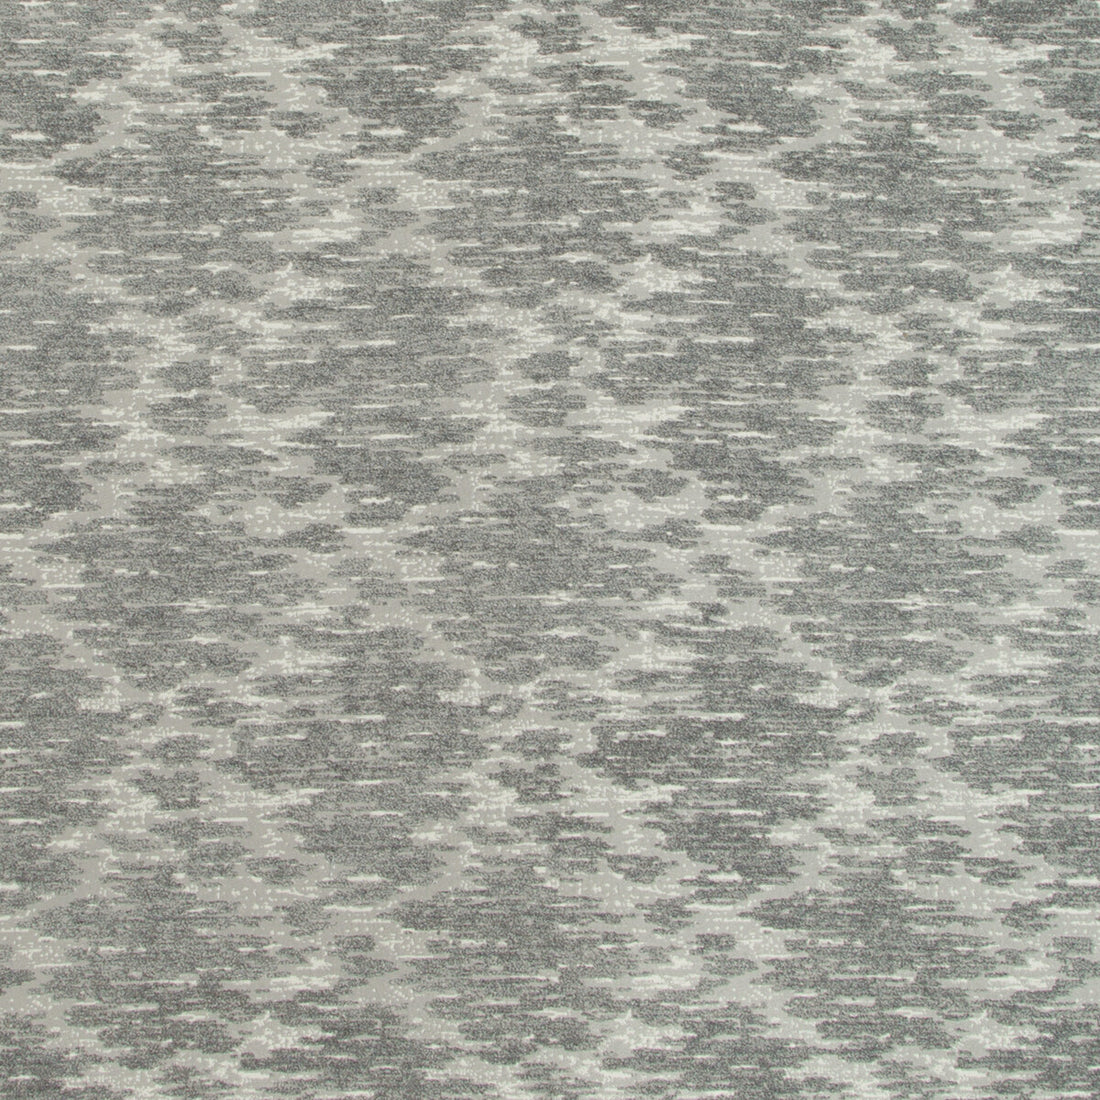 Immersive fabric in pewter color - pattern 35004.11.0 - by Kravet Basics in the Jeffrey Alan Marks Oceanview collection